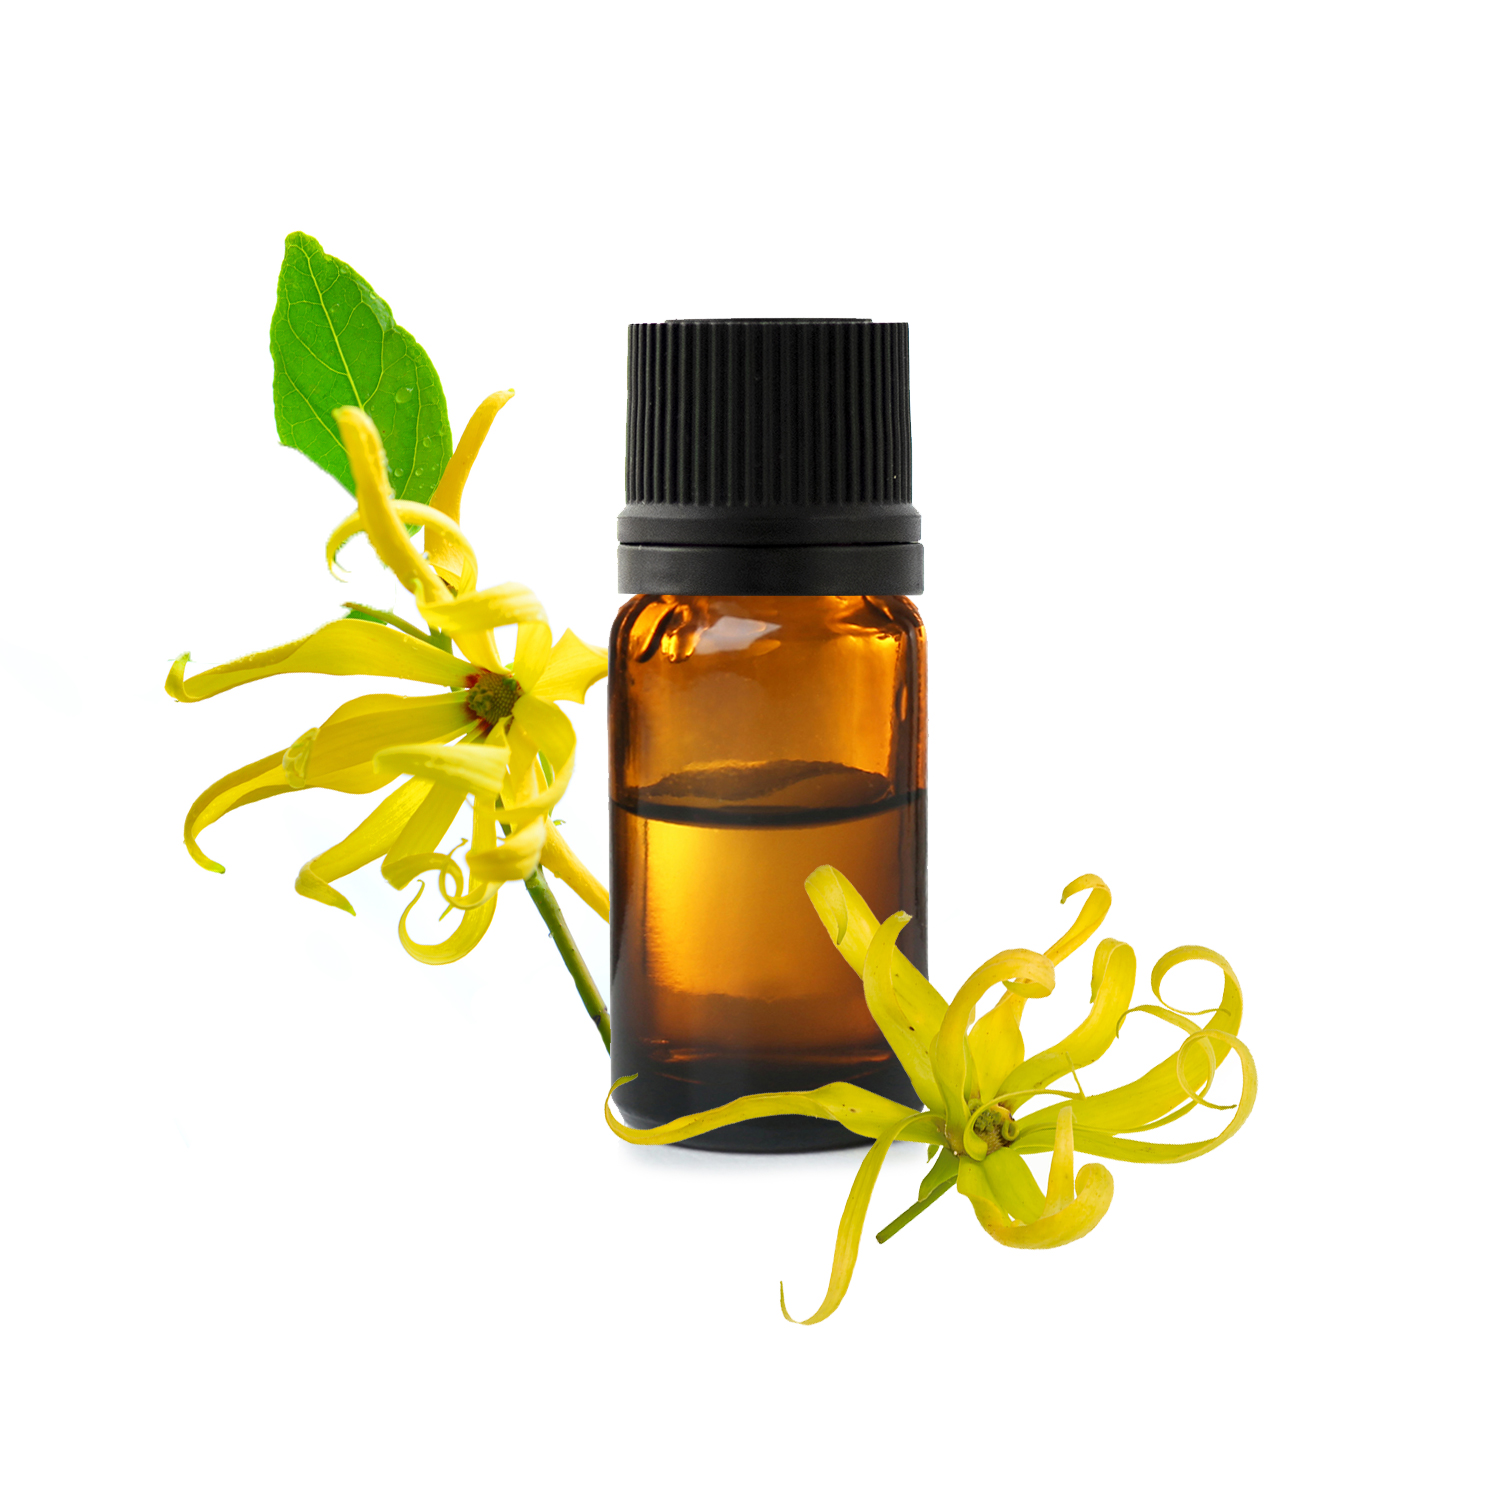 Huile Essentielle d'Ylang Ylang